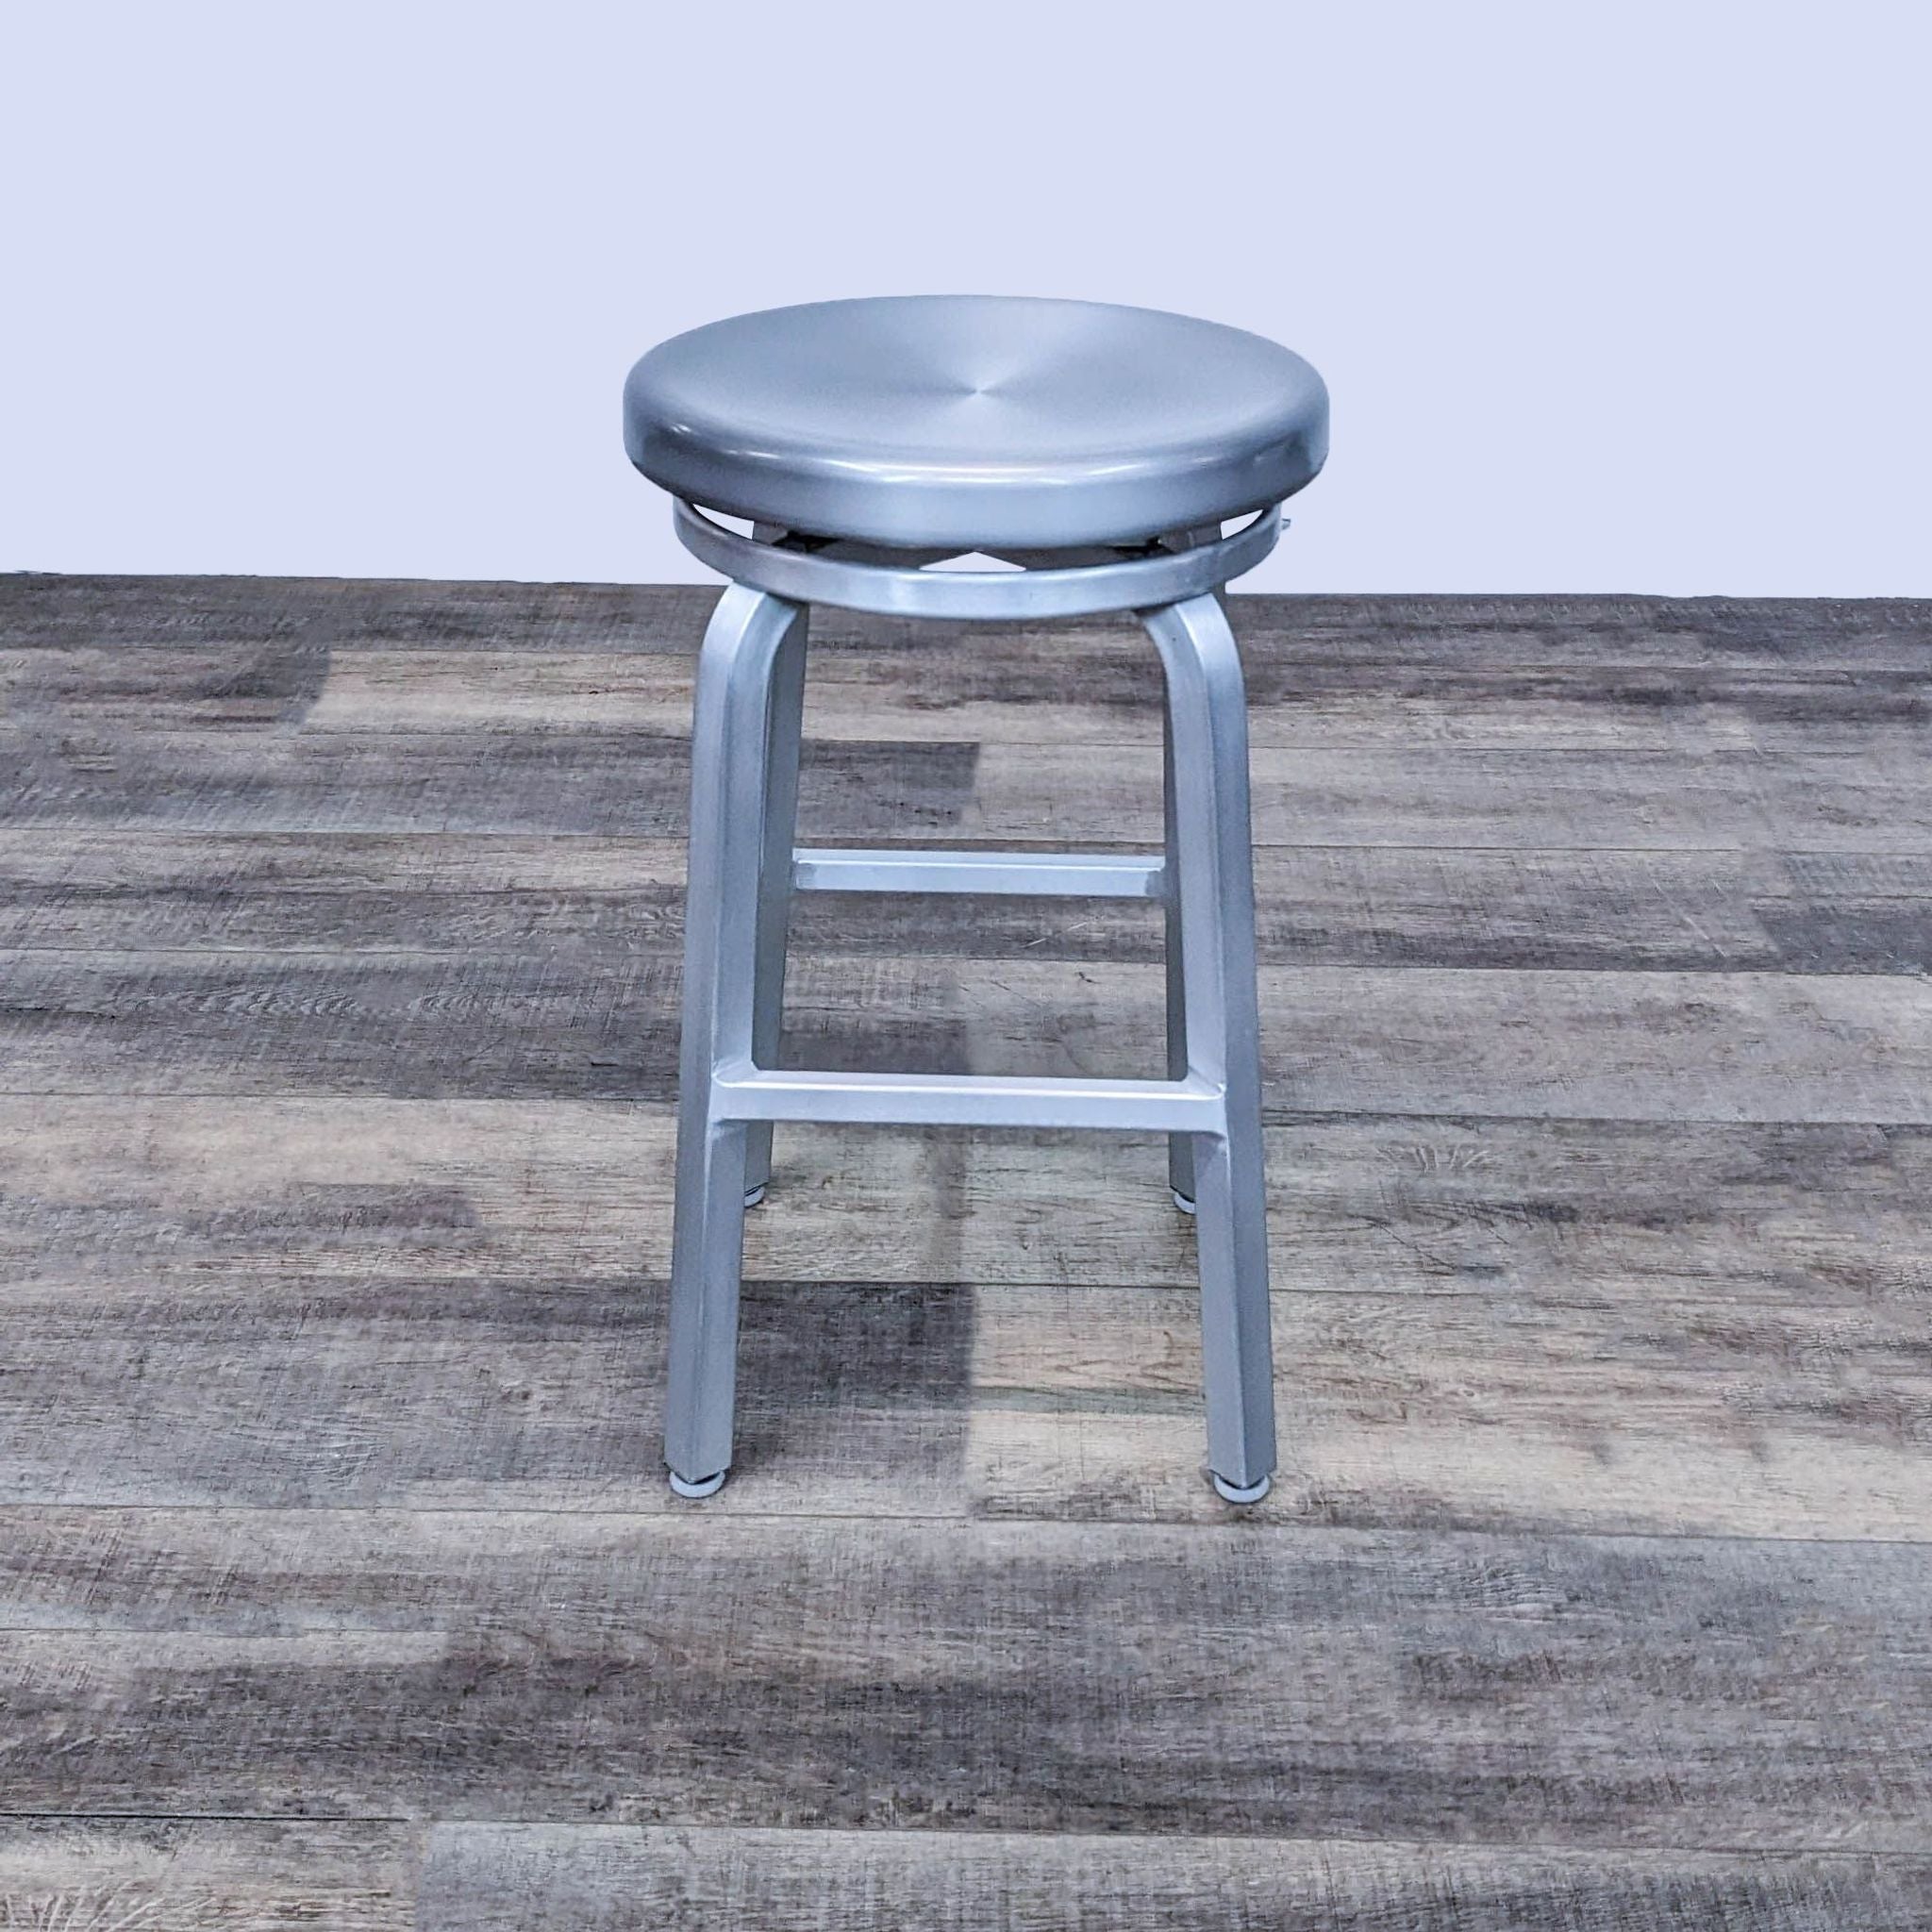 Reperch industrial-style metal stool with a round swivel seat and wooden floor background.